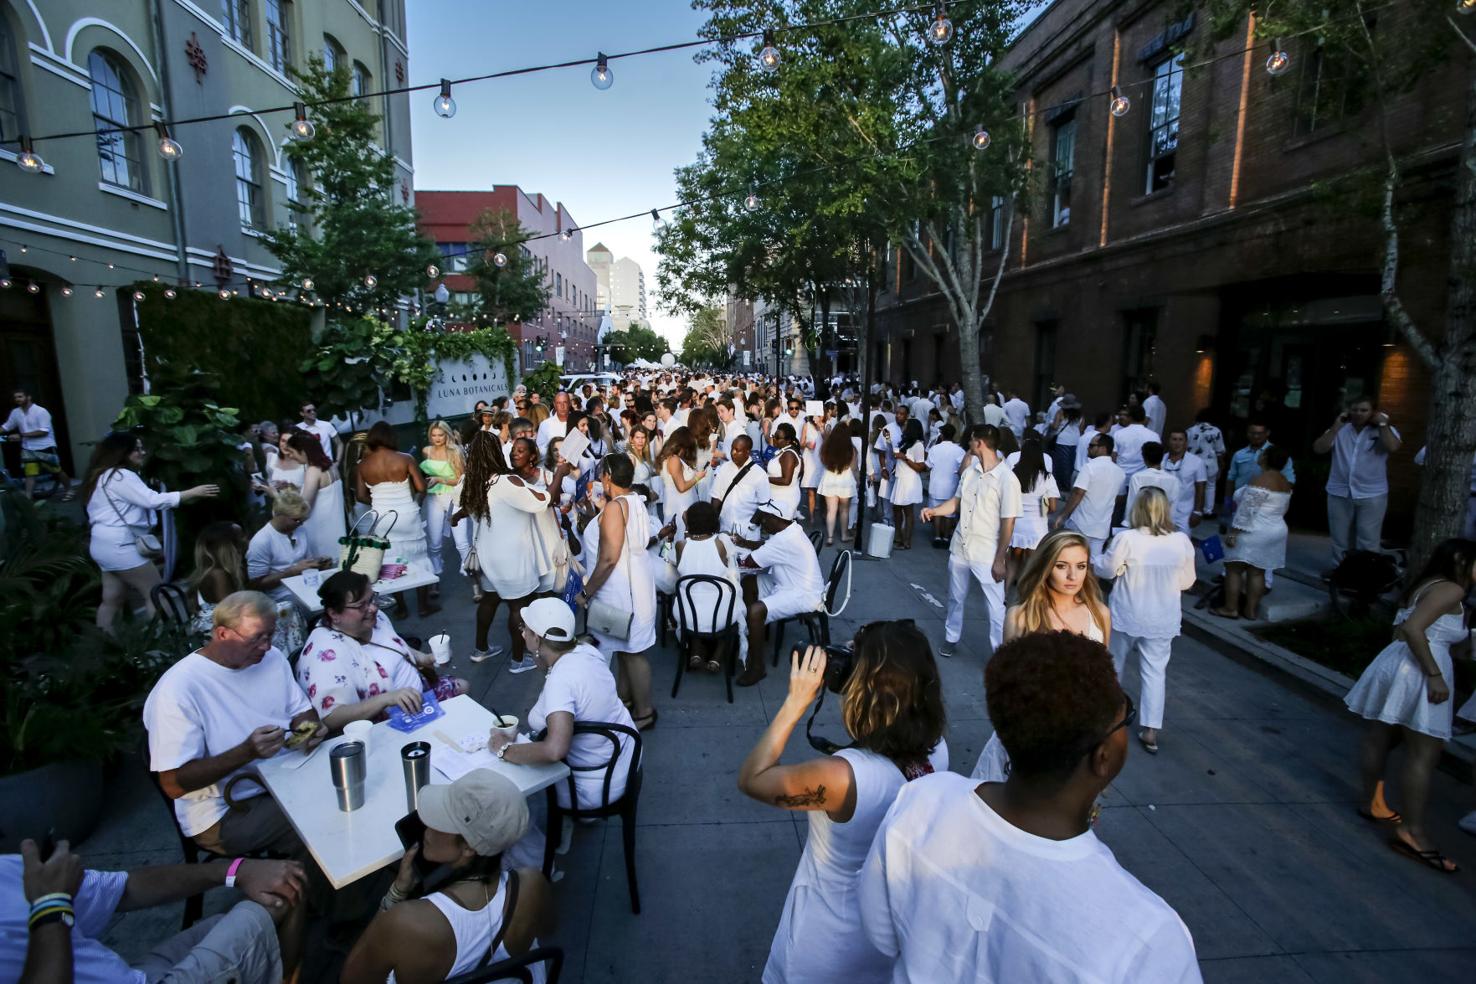 White Linen Night canceled at urging of New Orleans officials due to